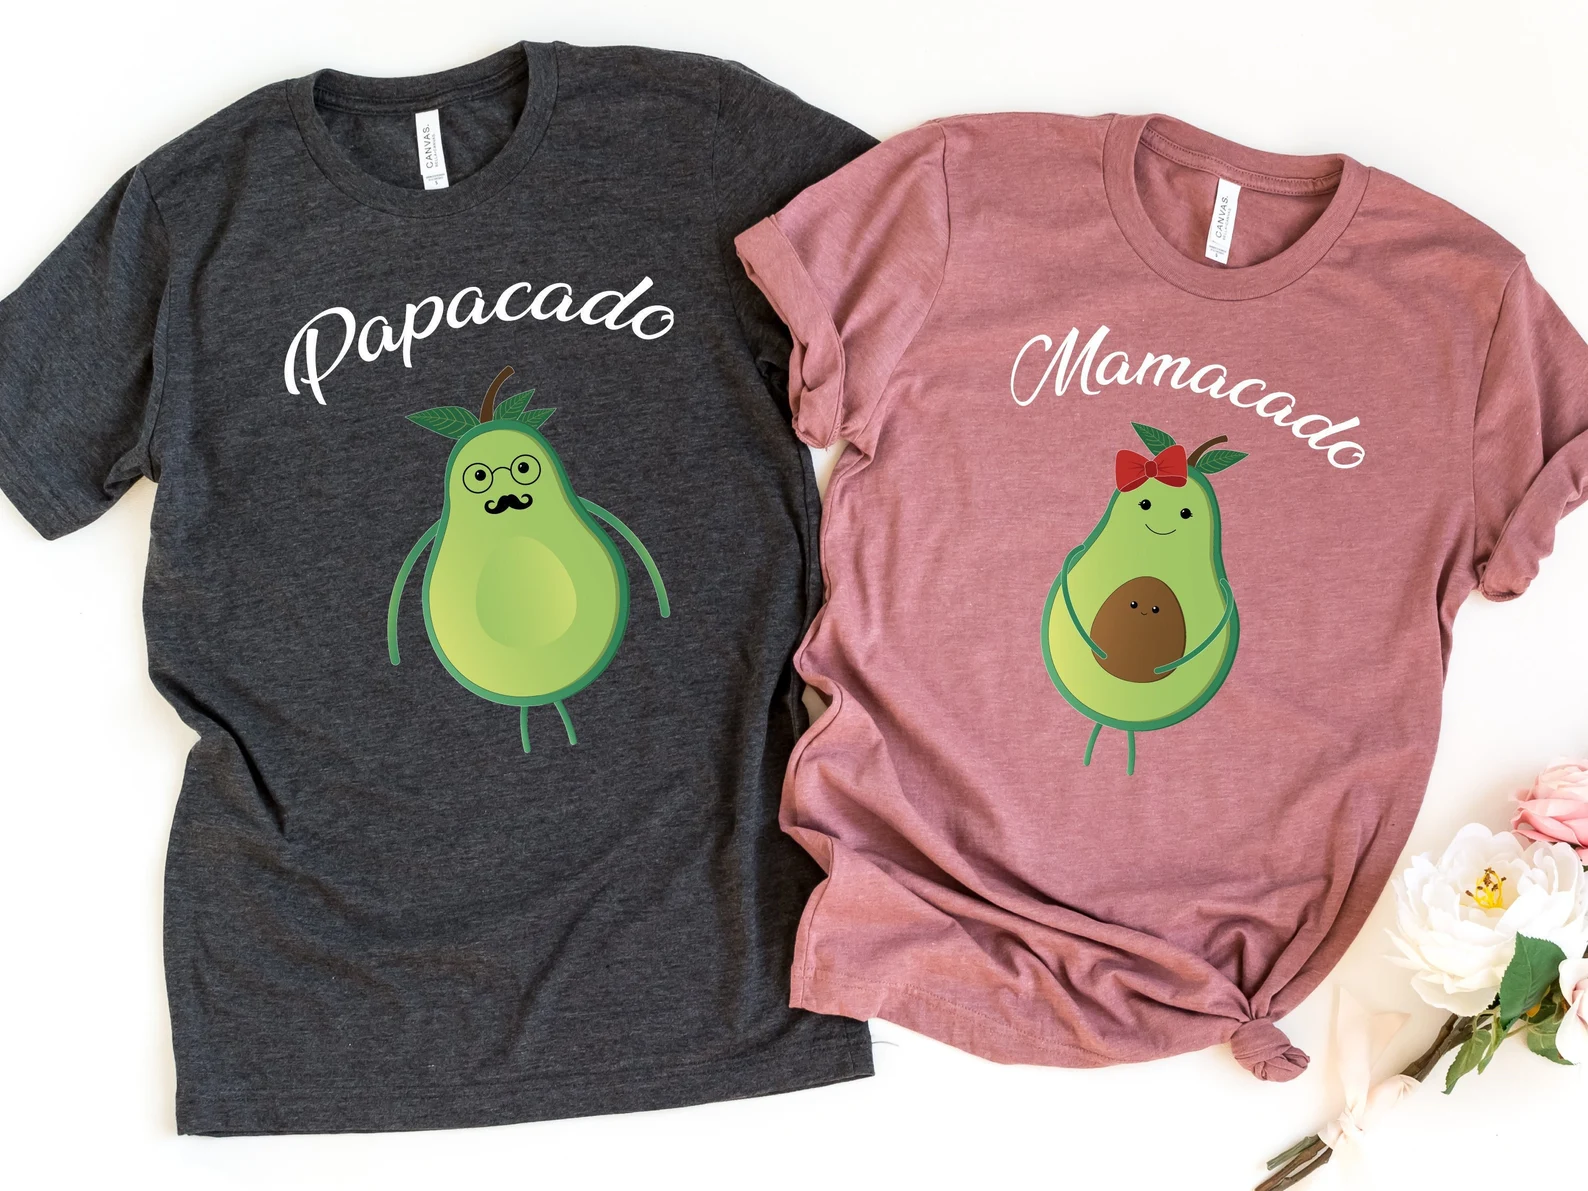 Pink and grey pregnancy announcement t-shirts with avocados on them 